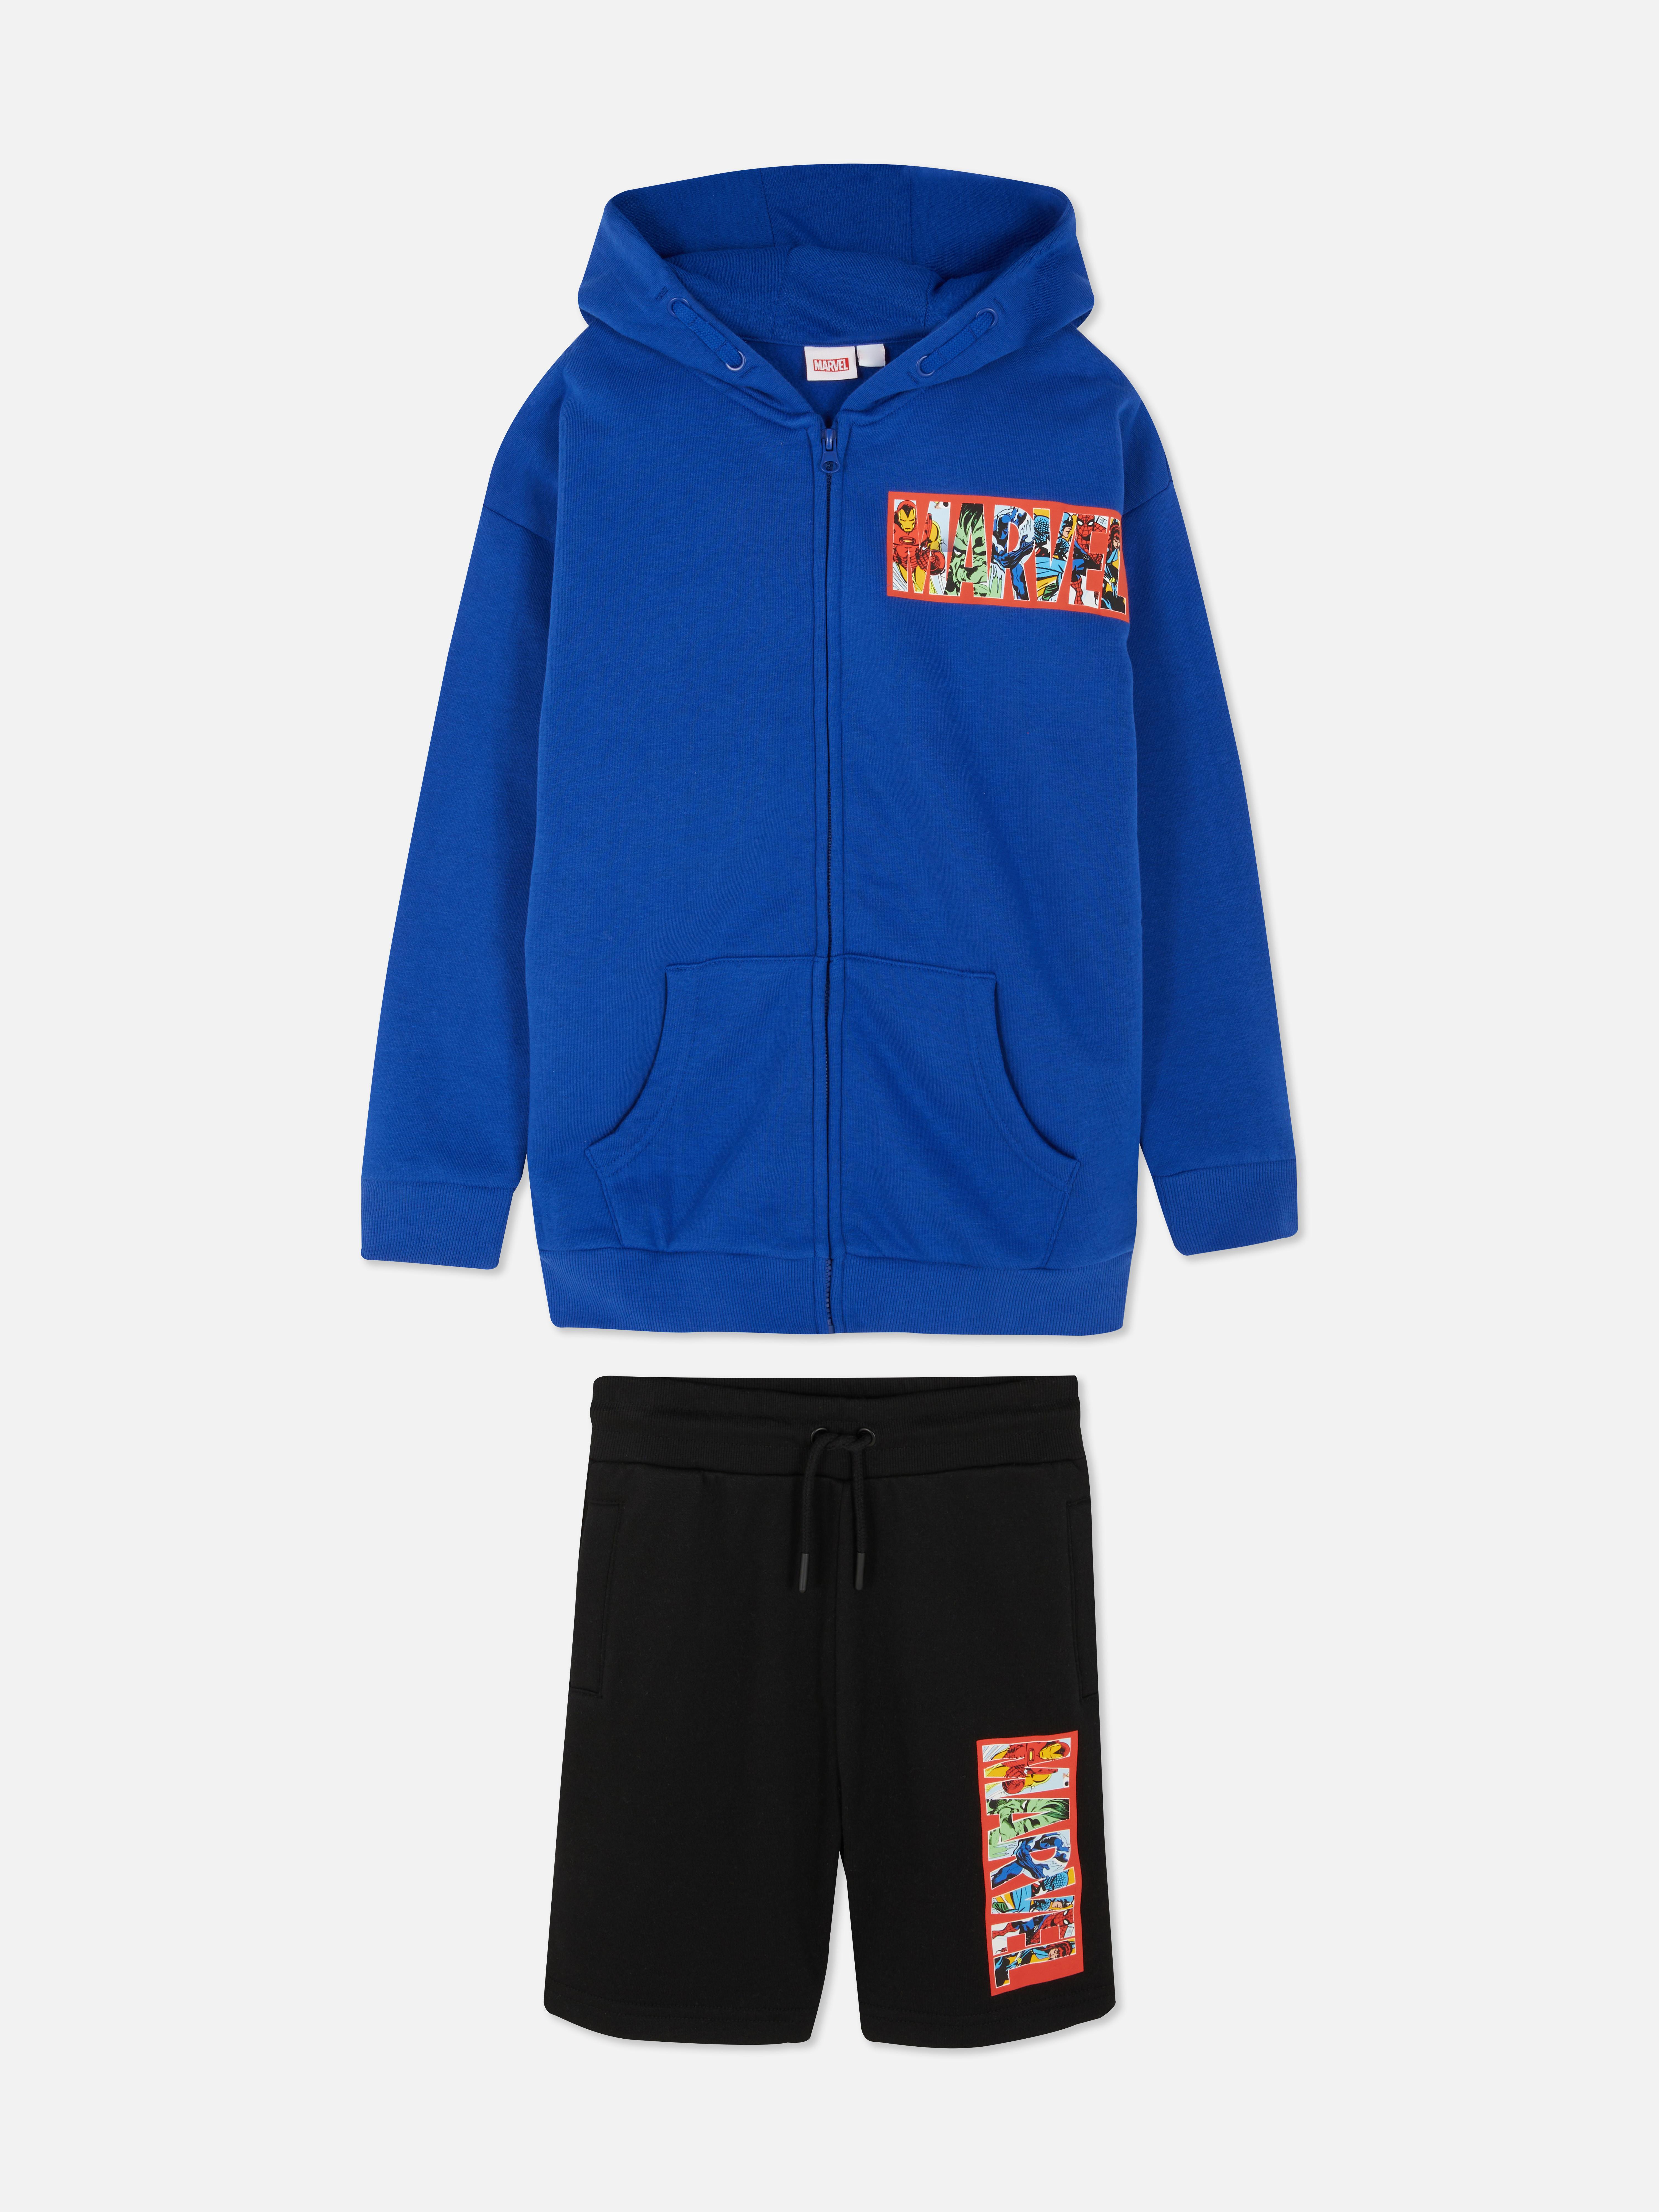 Marvel Hoodie and Shorts Set